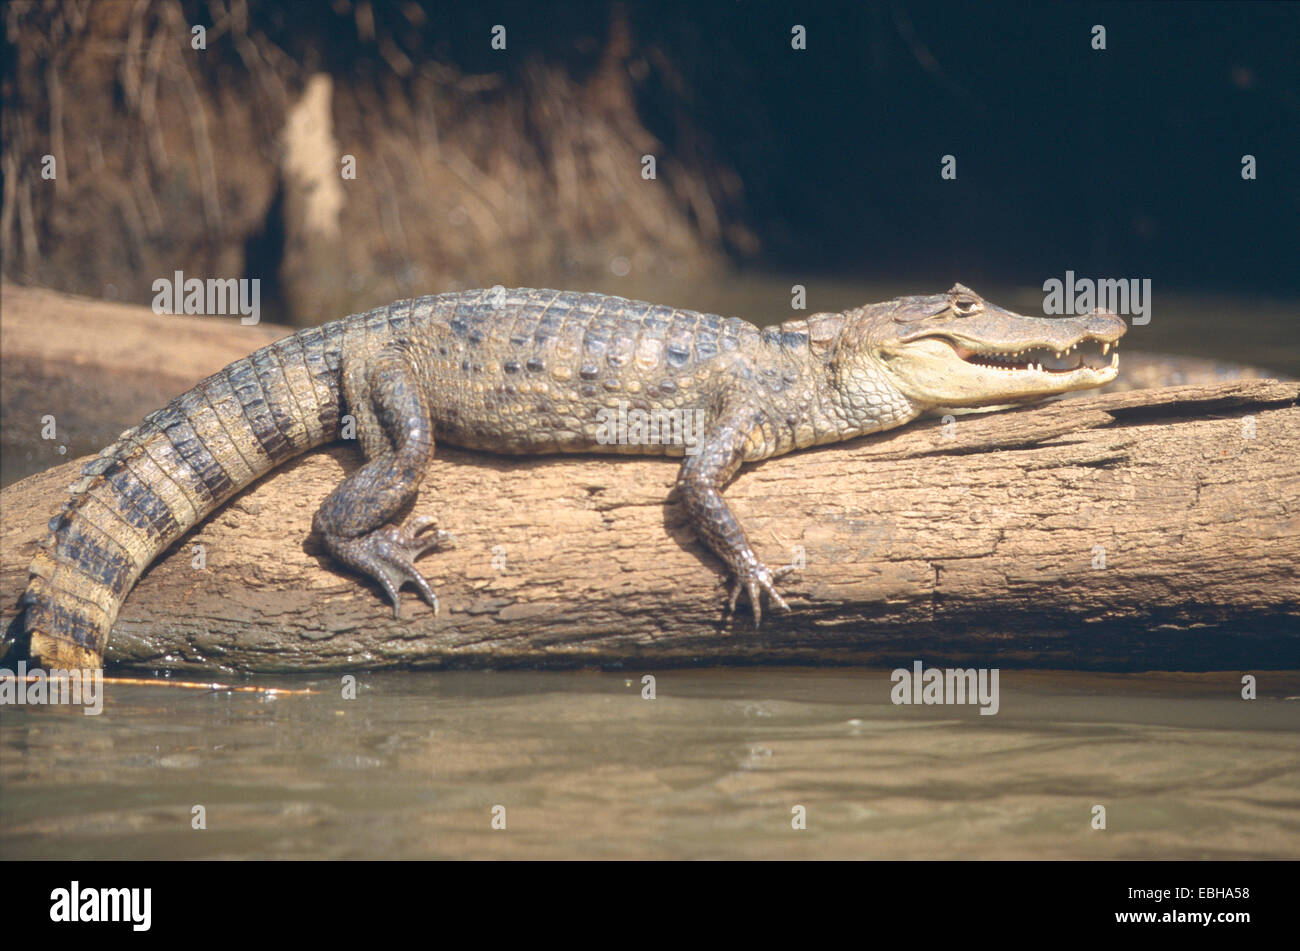 spectacled caiman (Caiman crocodilus), Is situated on the trunk in the water. Stock Photo